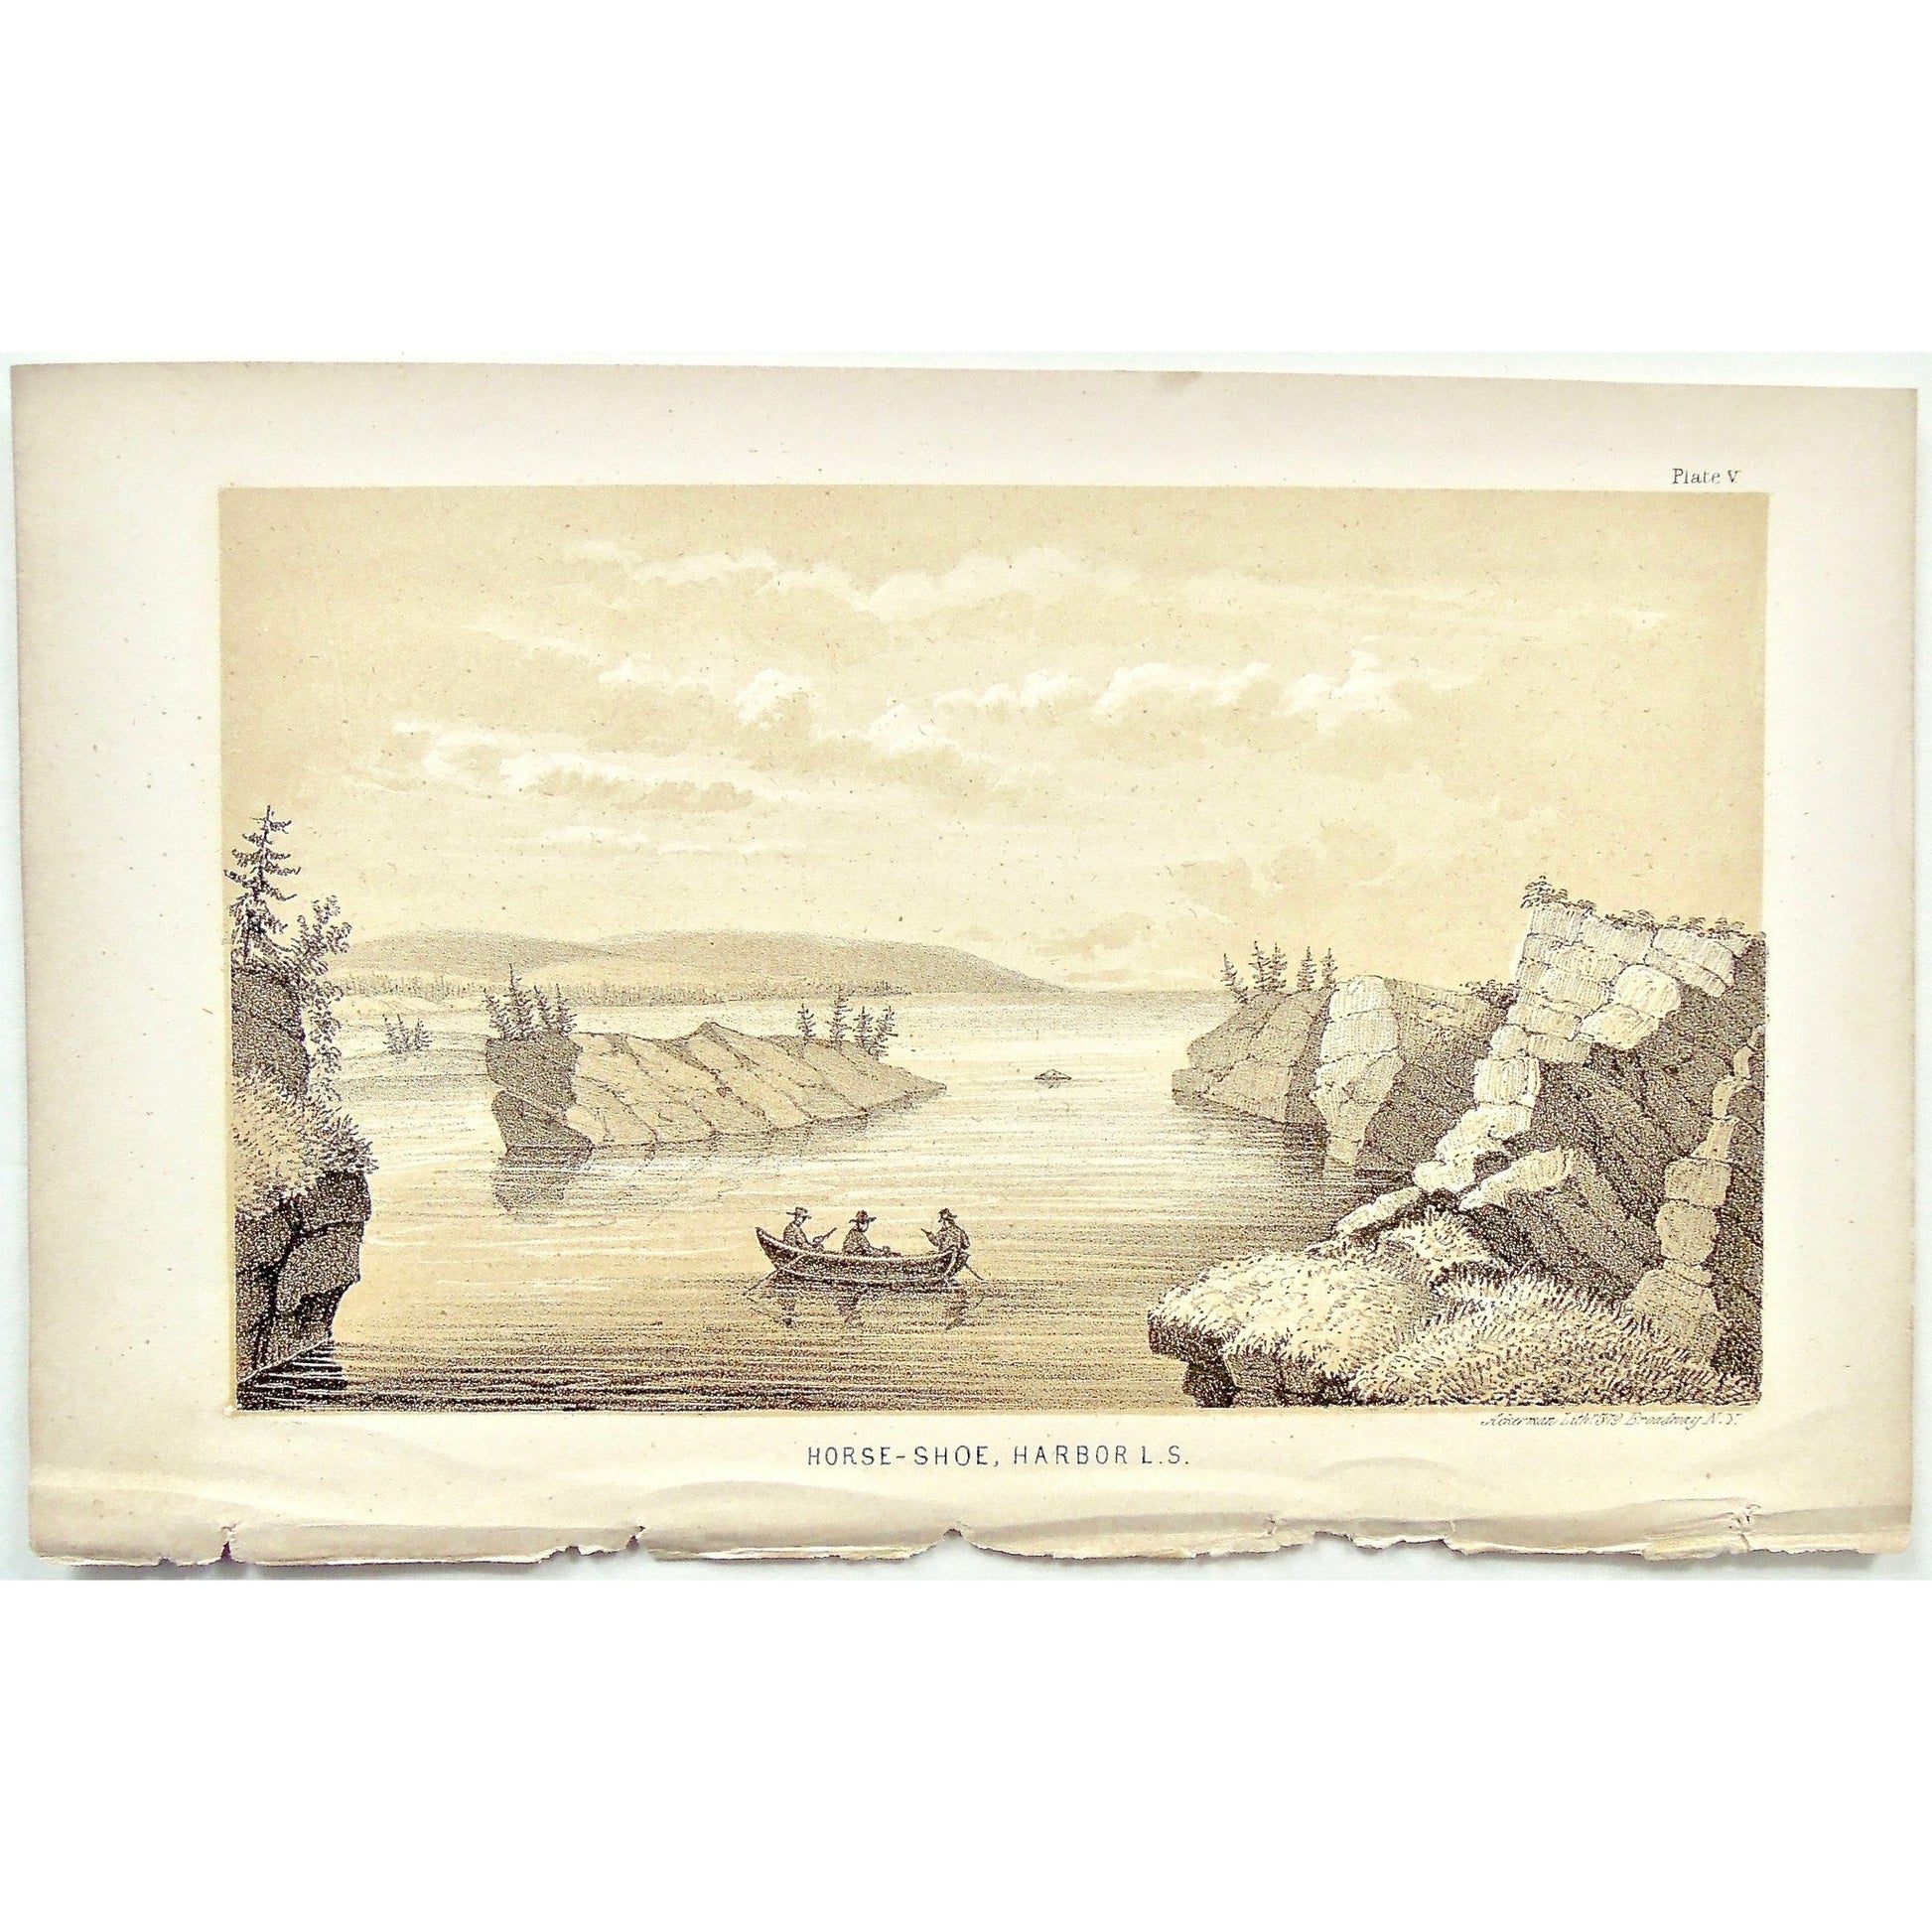 Horse-Shoe, Horseshoe, Harbor, Harbour, Horse-Shoe Harbor, View, rowing, rowboat, rocks, rock formations, L.S., Landscape, Lake Superior, Lake, Superior, National Lakeshore, Lakeshore, Michigan, MI, Ackerman, 379 Broadway, Foster, Whitney, House of Representatives, House of Reps., Report, Geology, Topography, Land District, State of Michigan, Part I, Copper Lands, General Geology, Washington D.C., Washington, DC, D.C., 185o, lithograph, two-toned, Antique Print, Antique, Prints, Vintage, Art, Wall art, Deco